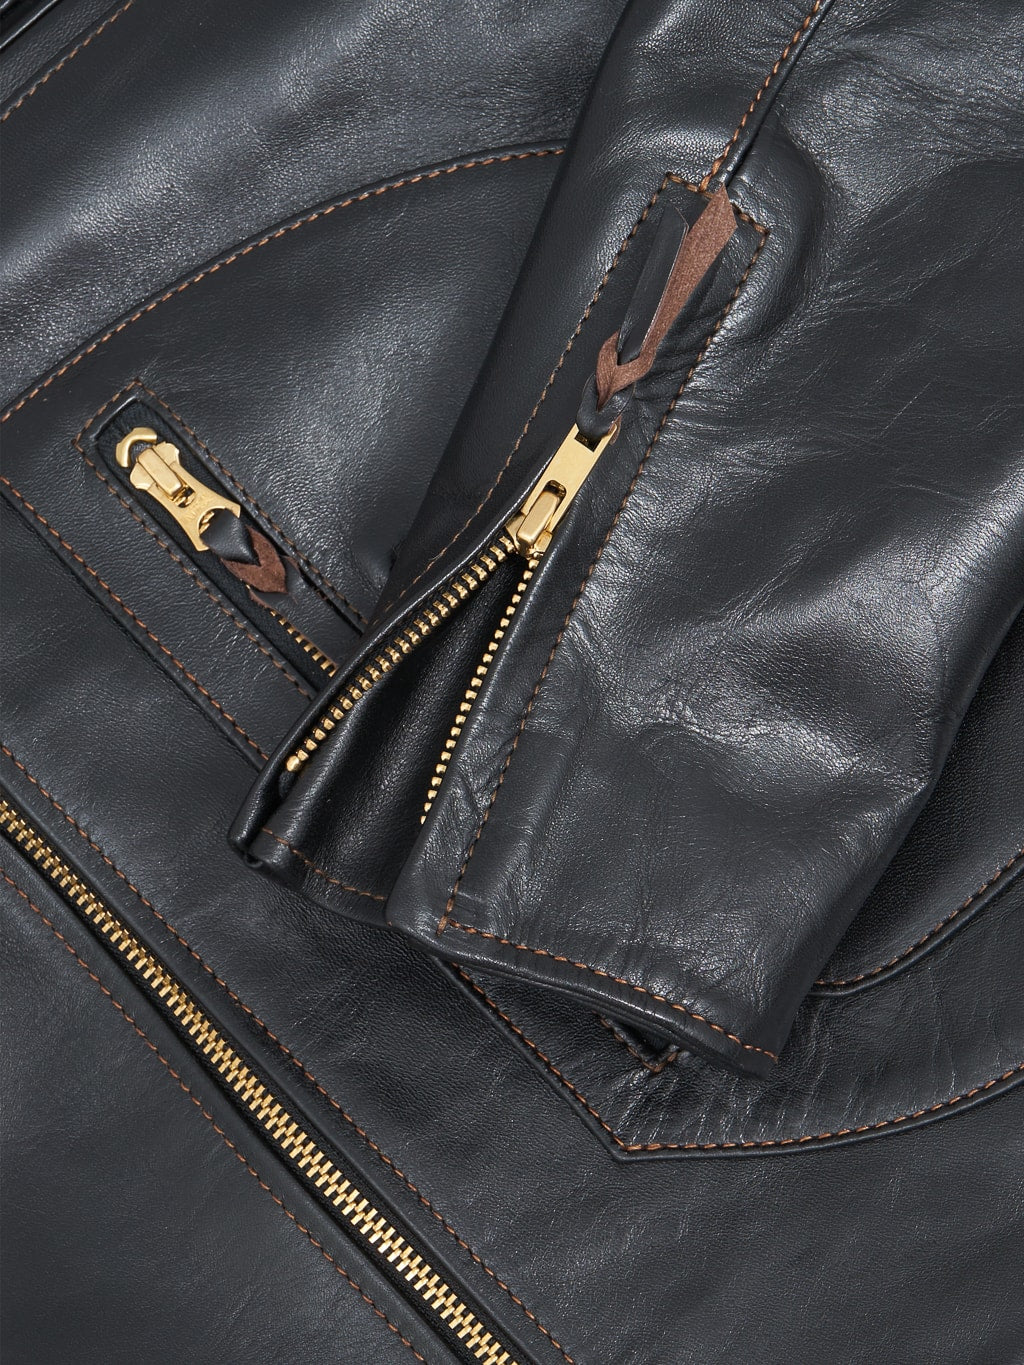 The Flat Head Horsehide leather double Riders Jacket Black Semi Aniline cuff